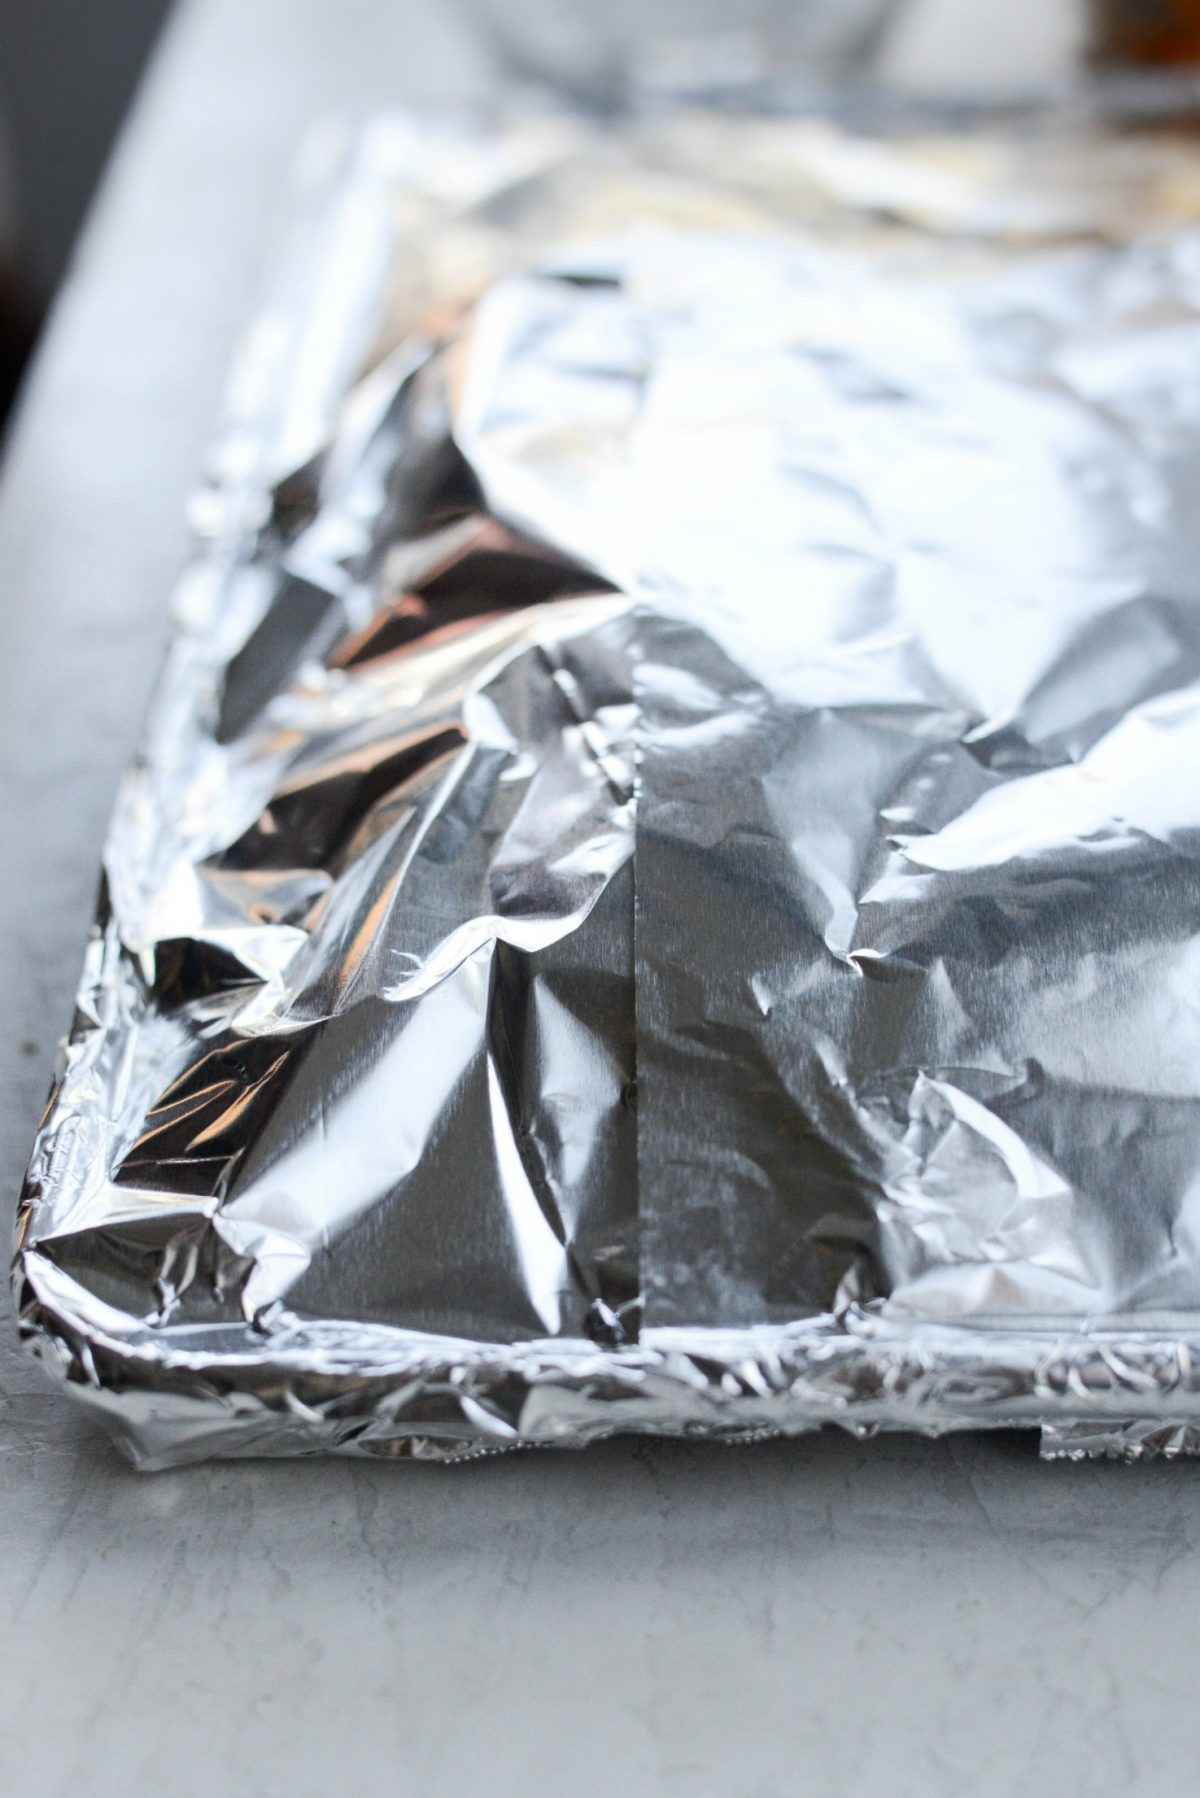 cover with foil and bake